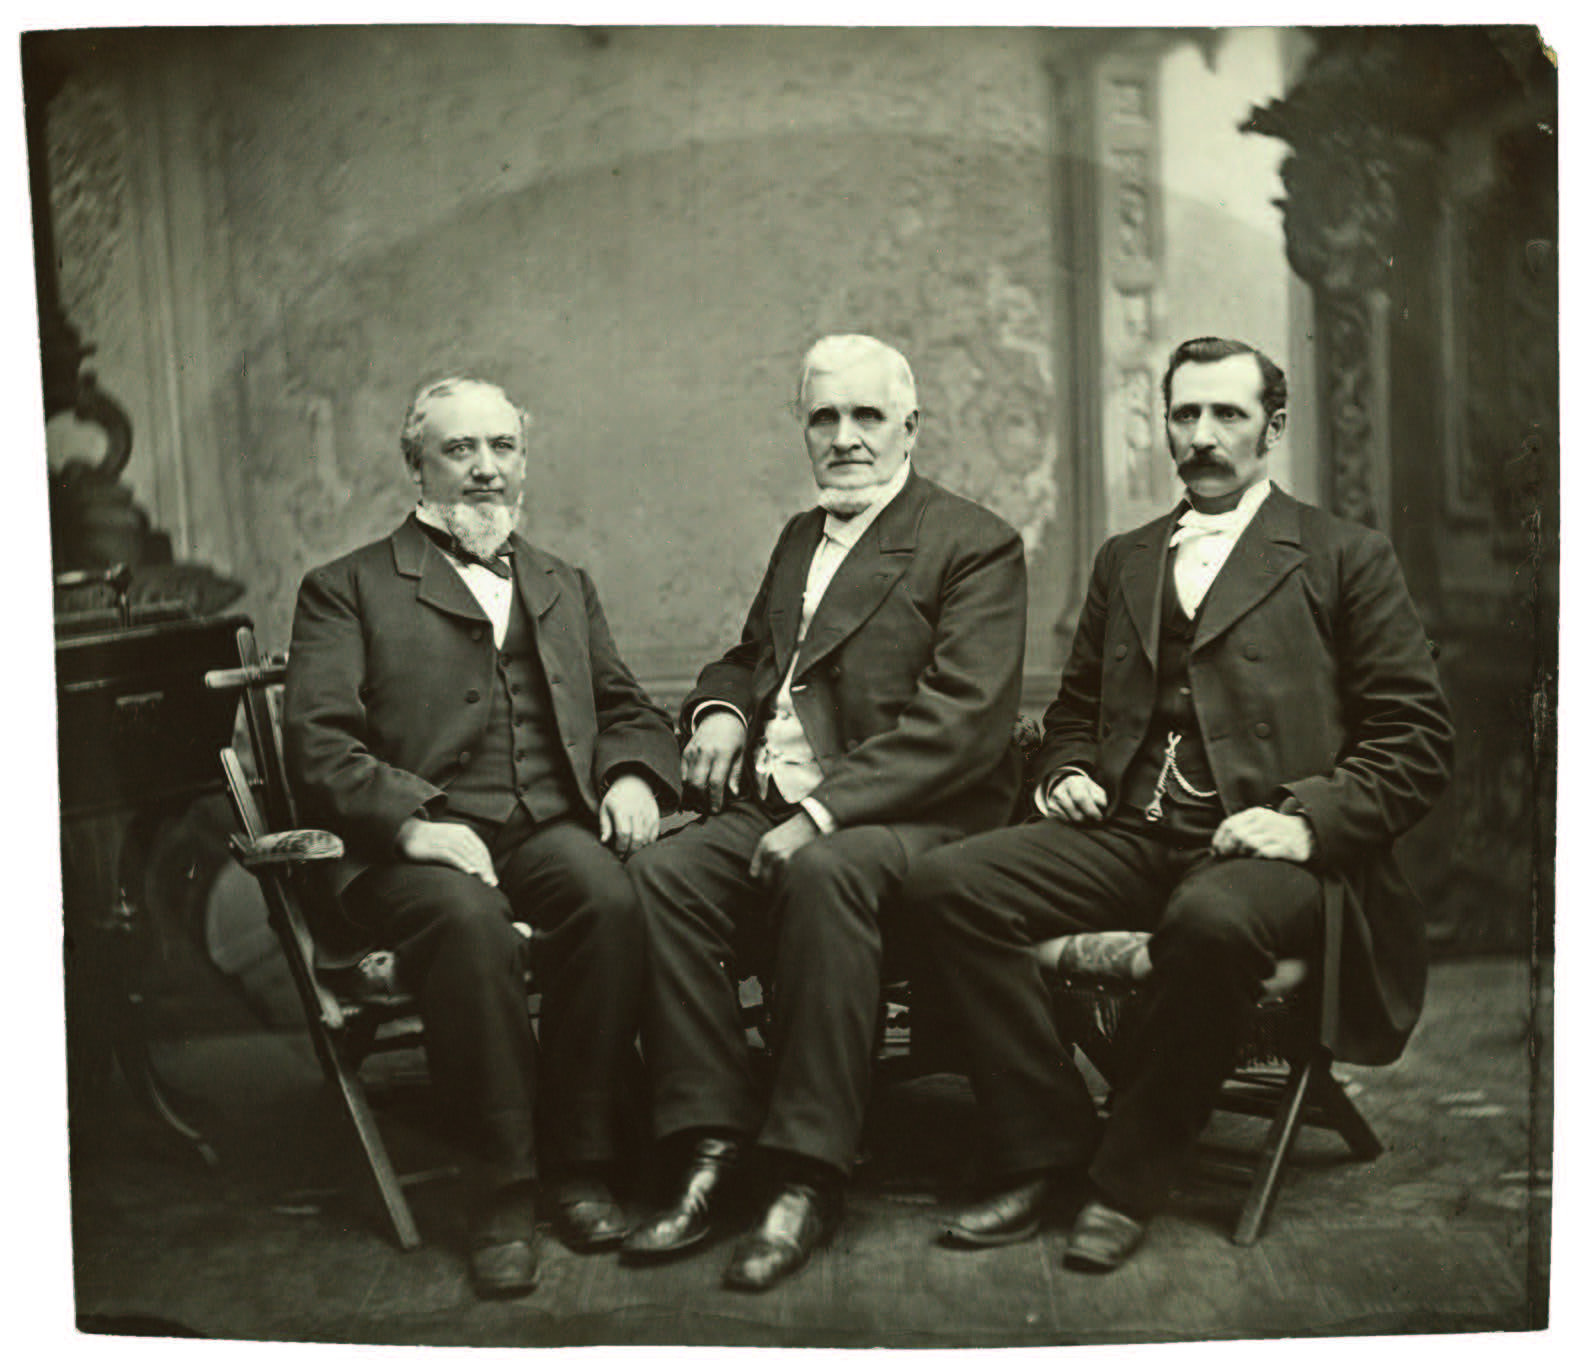 The First Presidency with George Q. Cannon, John Taylor, and Joseph F. Smith